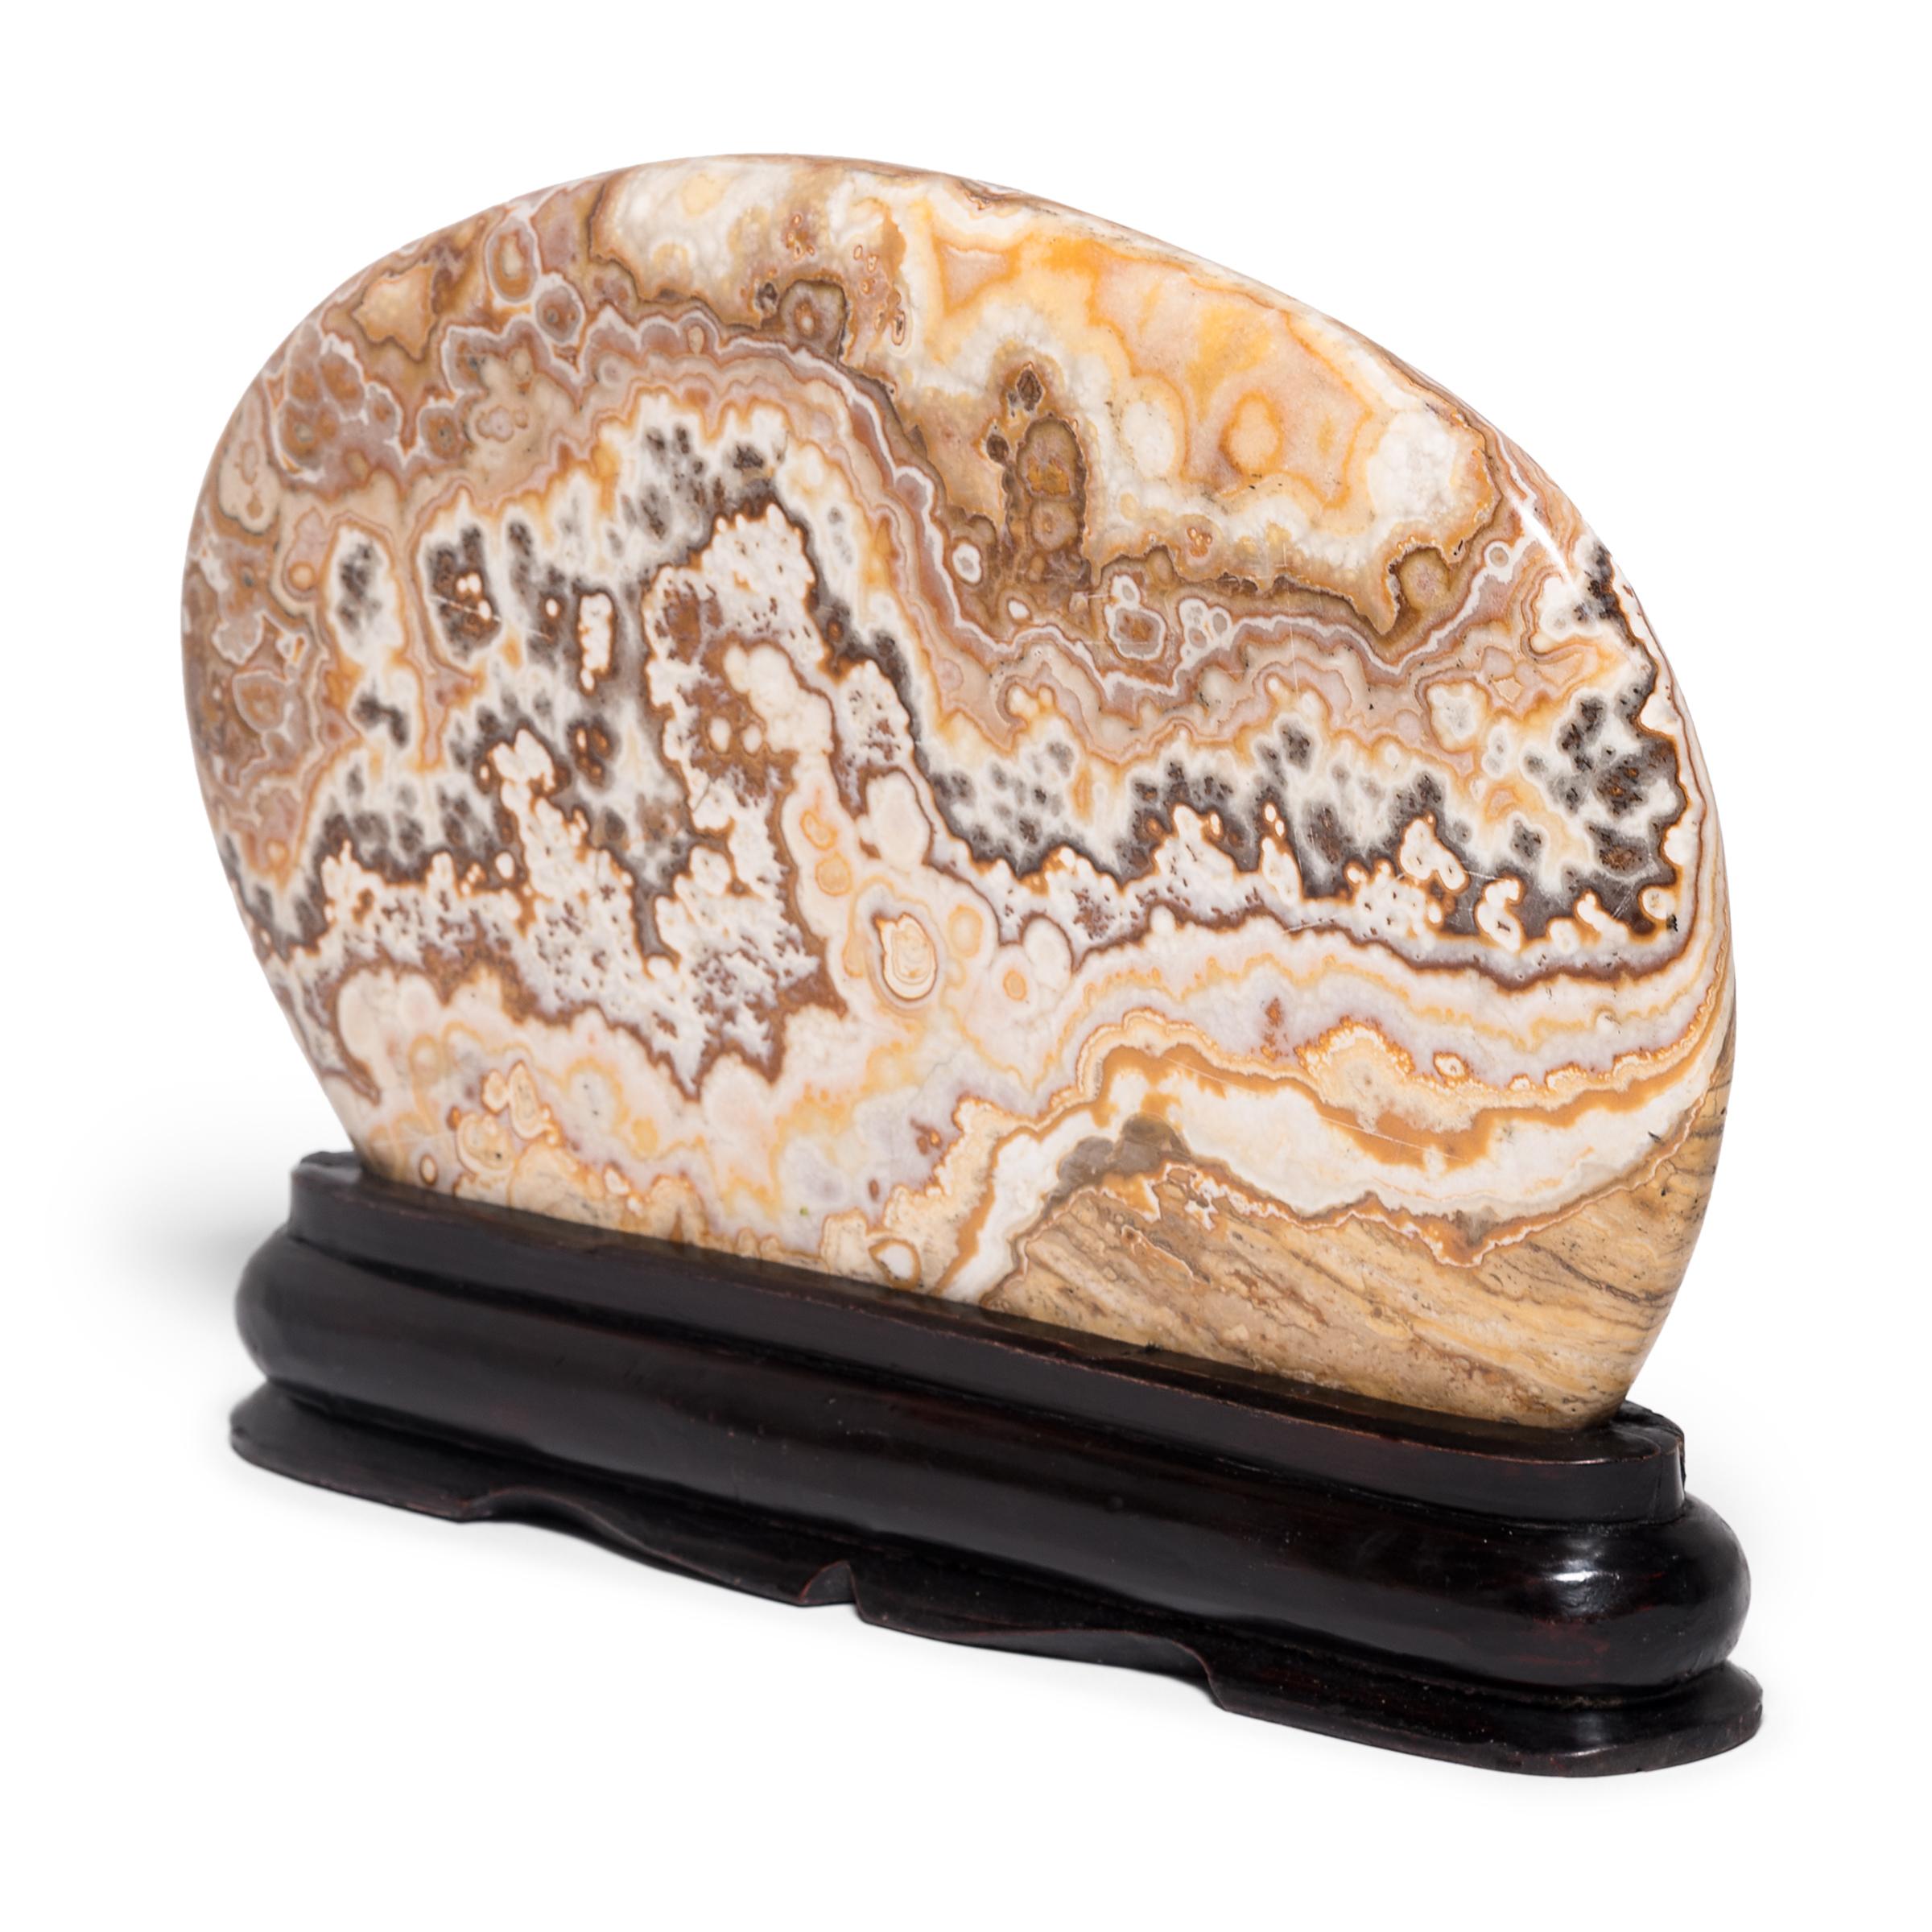 Elevated on a wood base, this mesmerizing danma stone is intricately patterned with swirling mineral deposits. Meditating on the stone’s intriguing, irregular composition, the scholar found inspiration in the stone’s complex layering as a microcosm